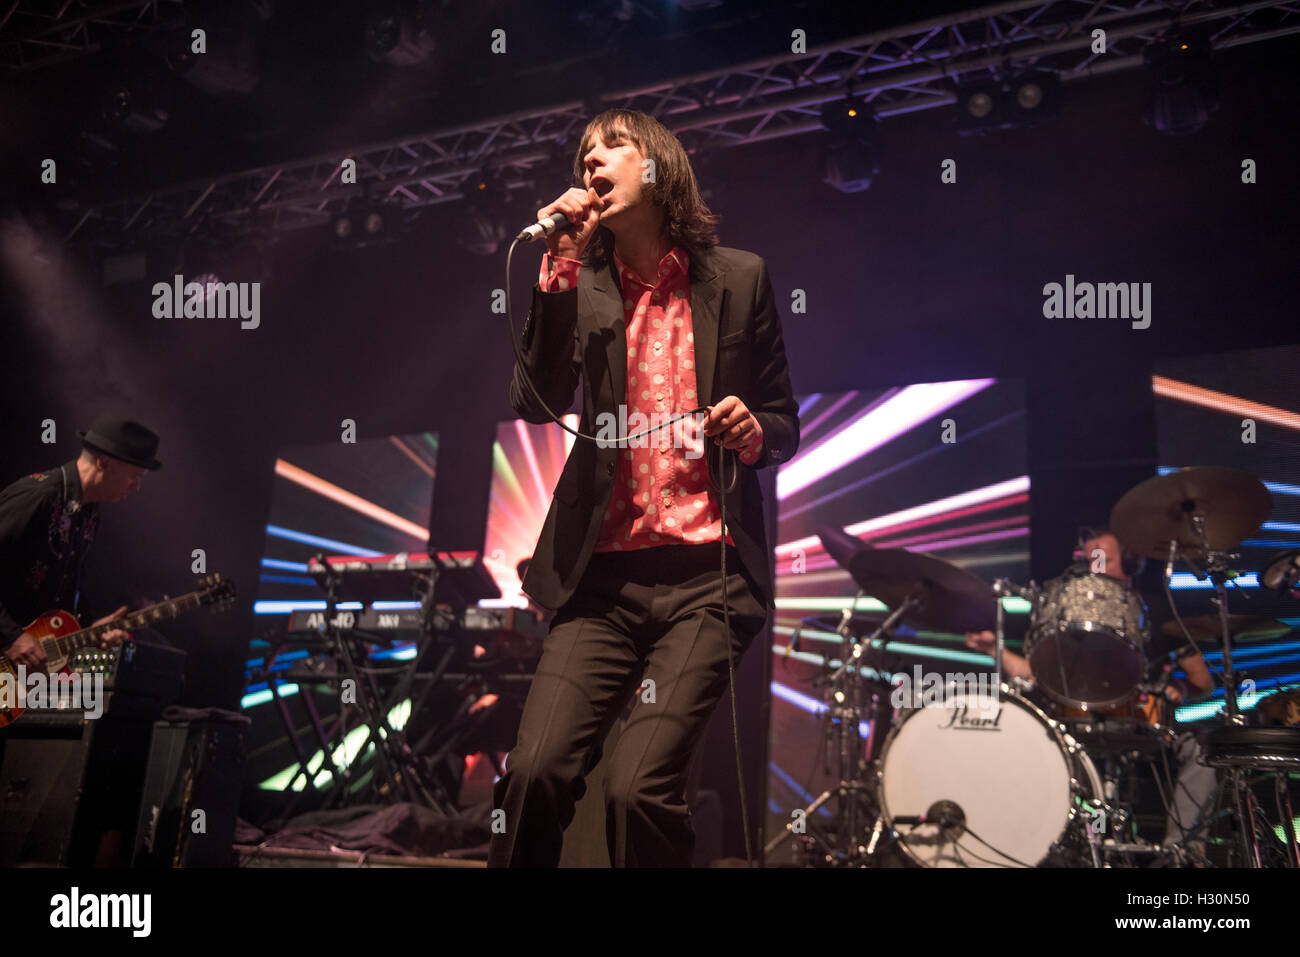 Manchester, UK. 24th September 2016. Primal Scream perform on the main stage at The British Sound Project 2016, 24/09/2016 © Gar Stock Photo